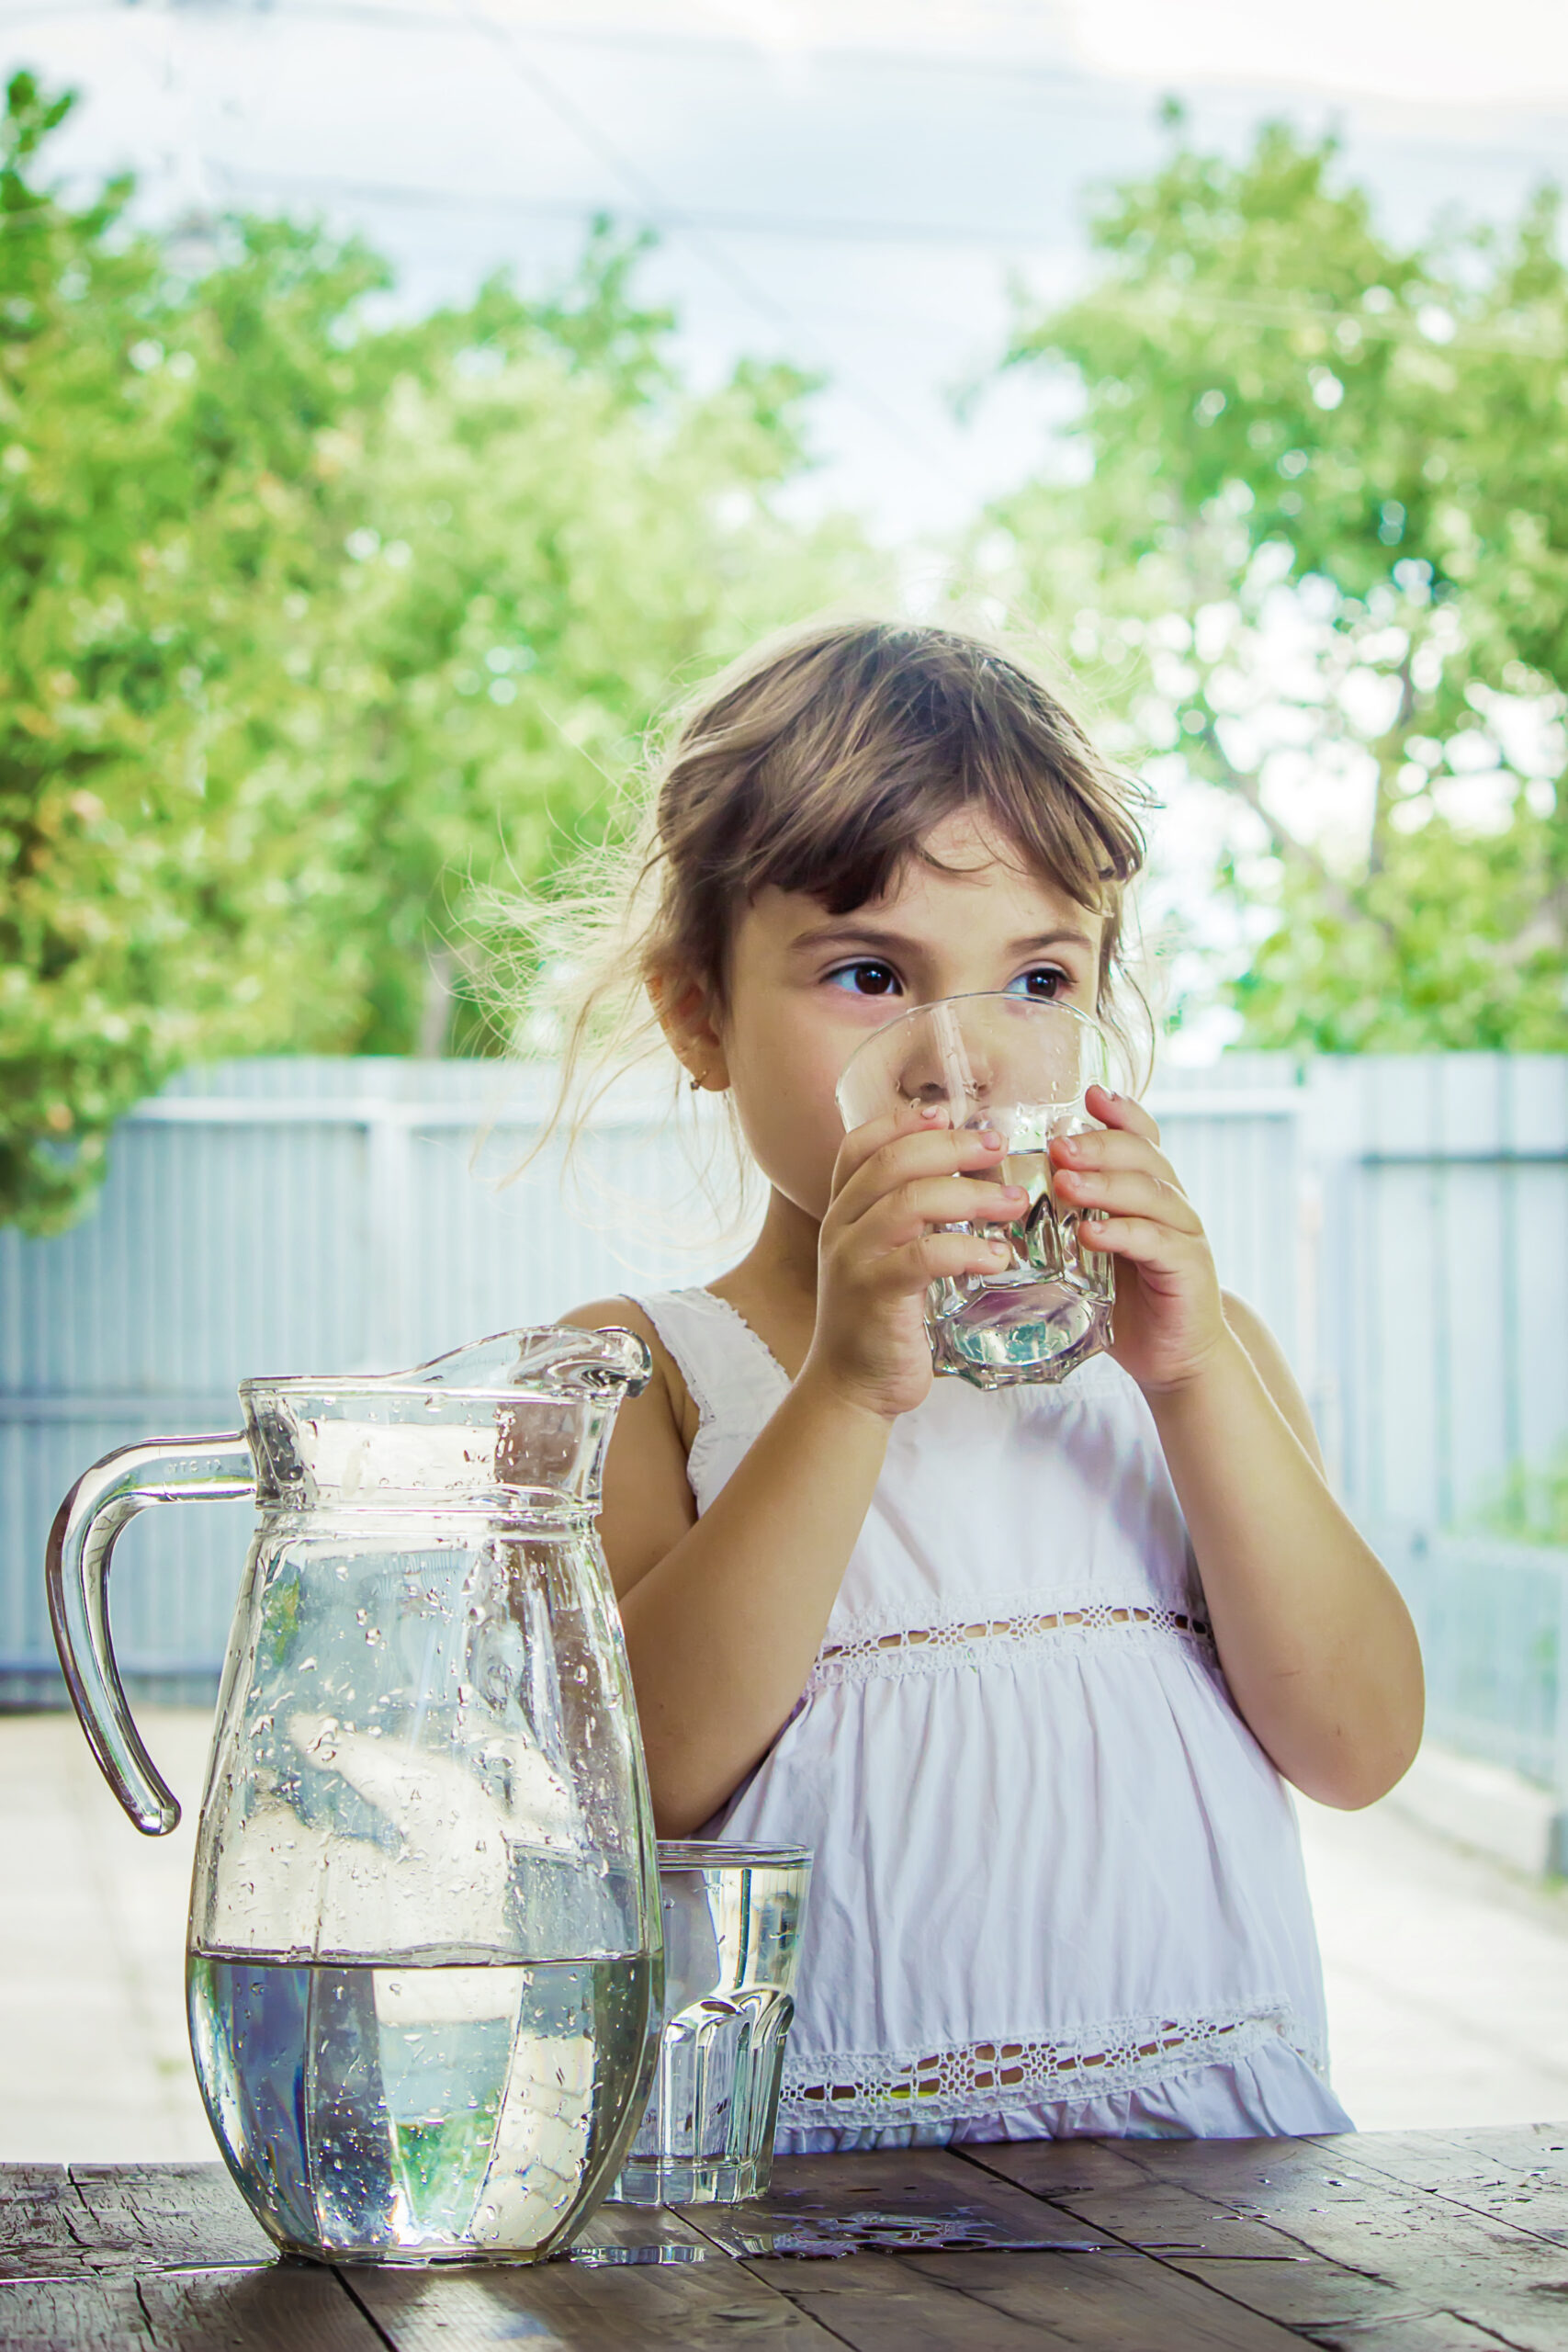 Child drinking clear water from glass